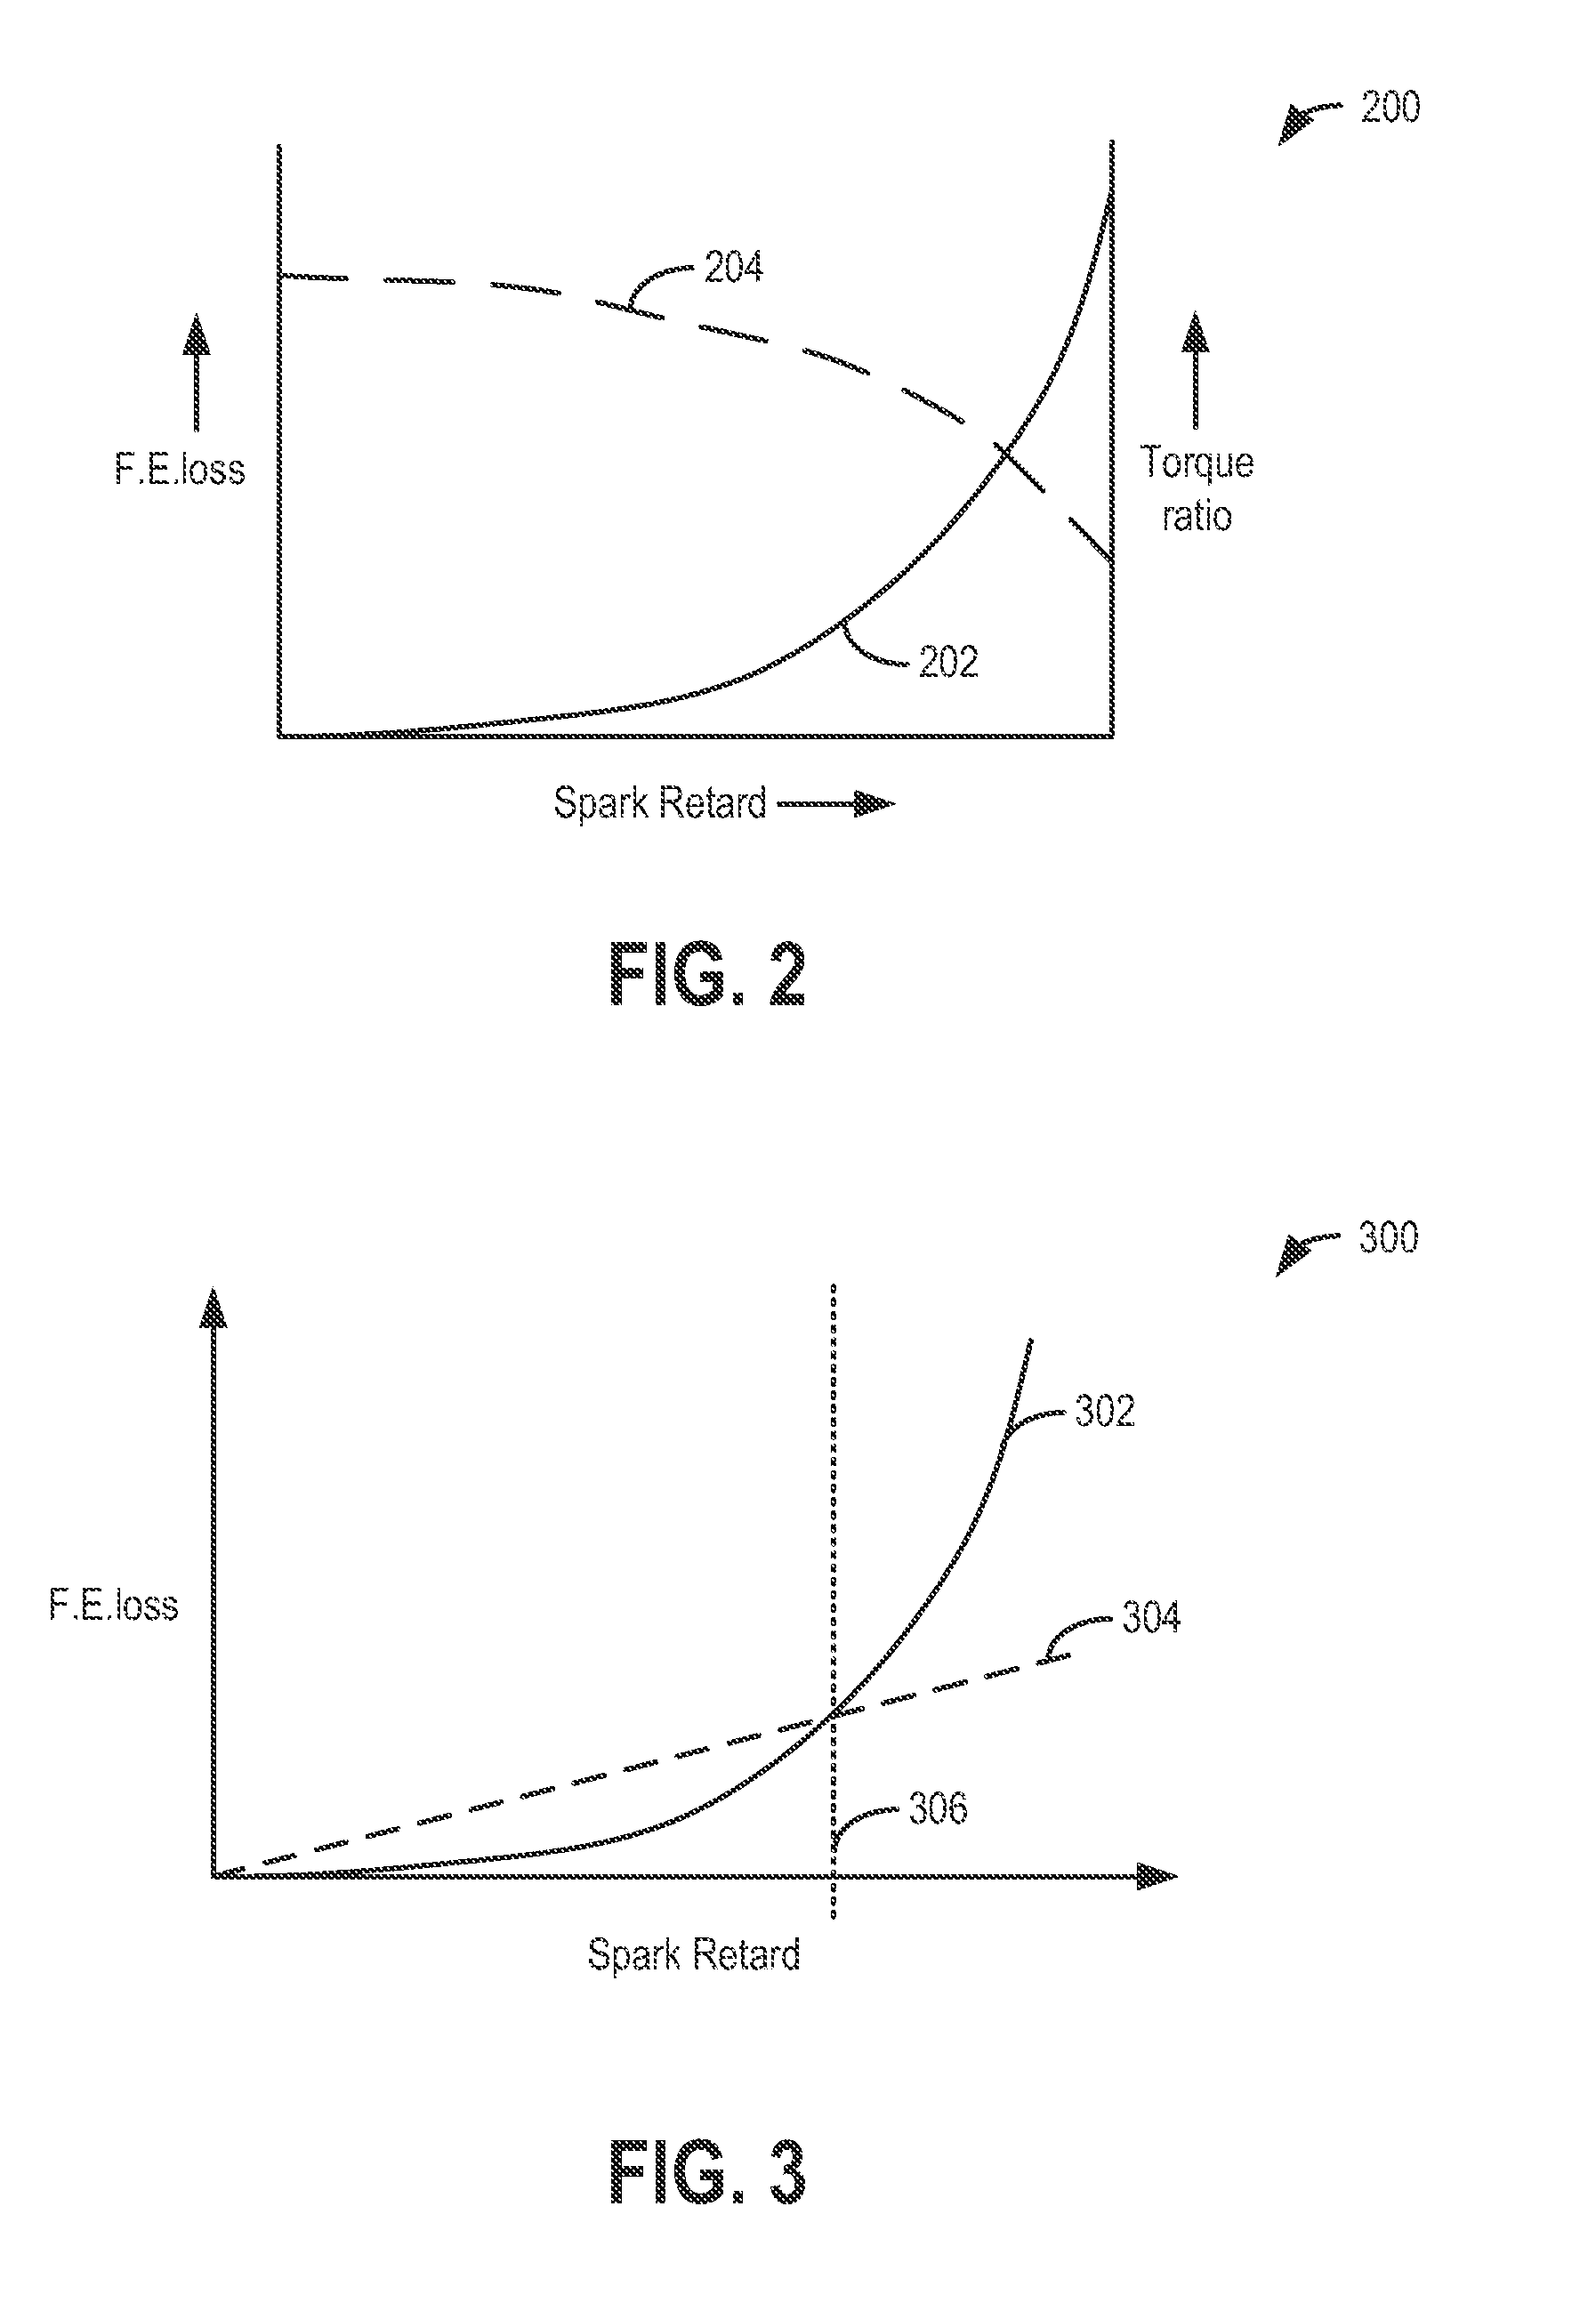 Method and system for controlling fuel usage